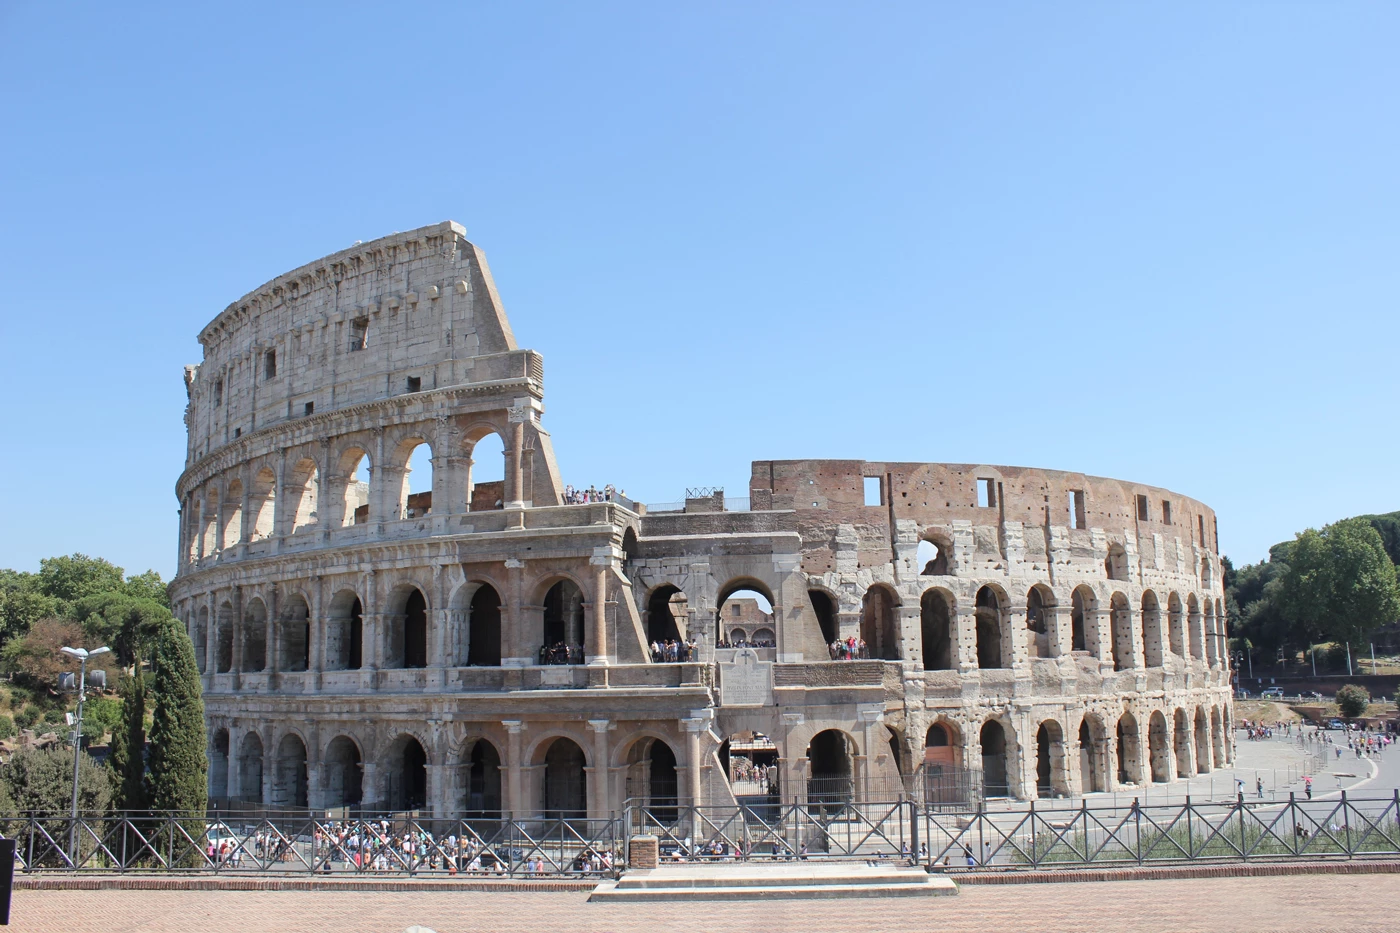 The huge stone, Roman Colosseum on a sunny day